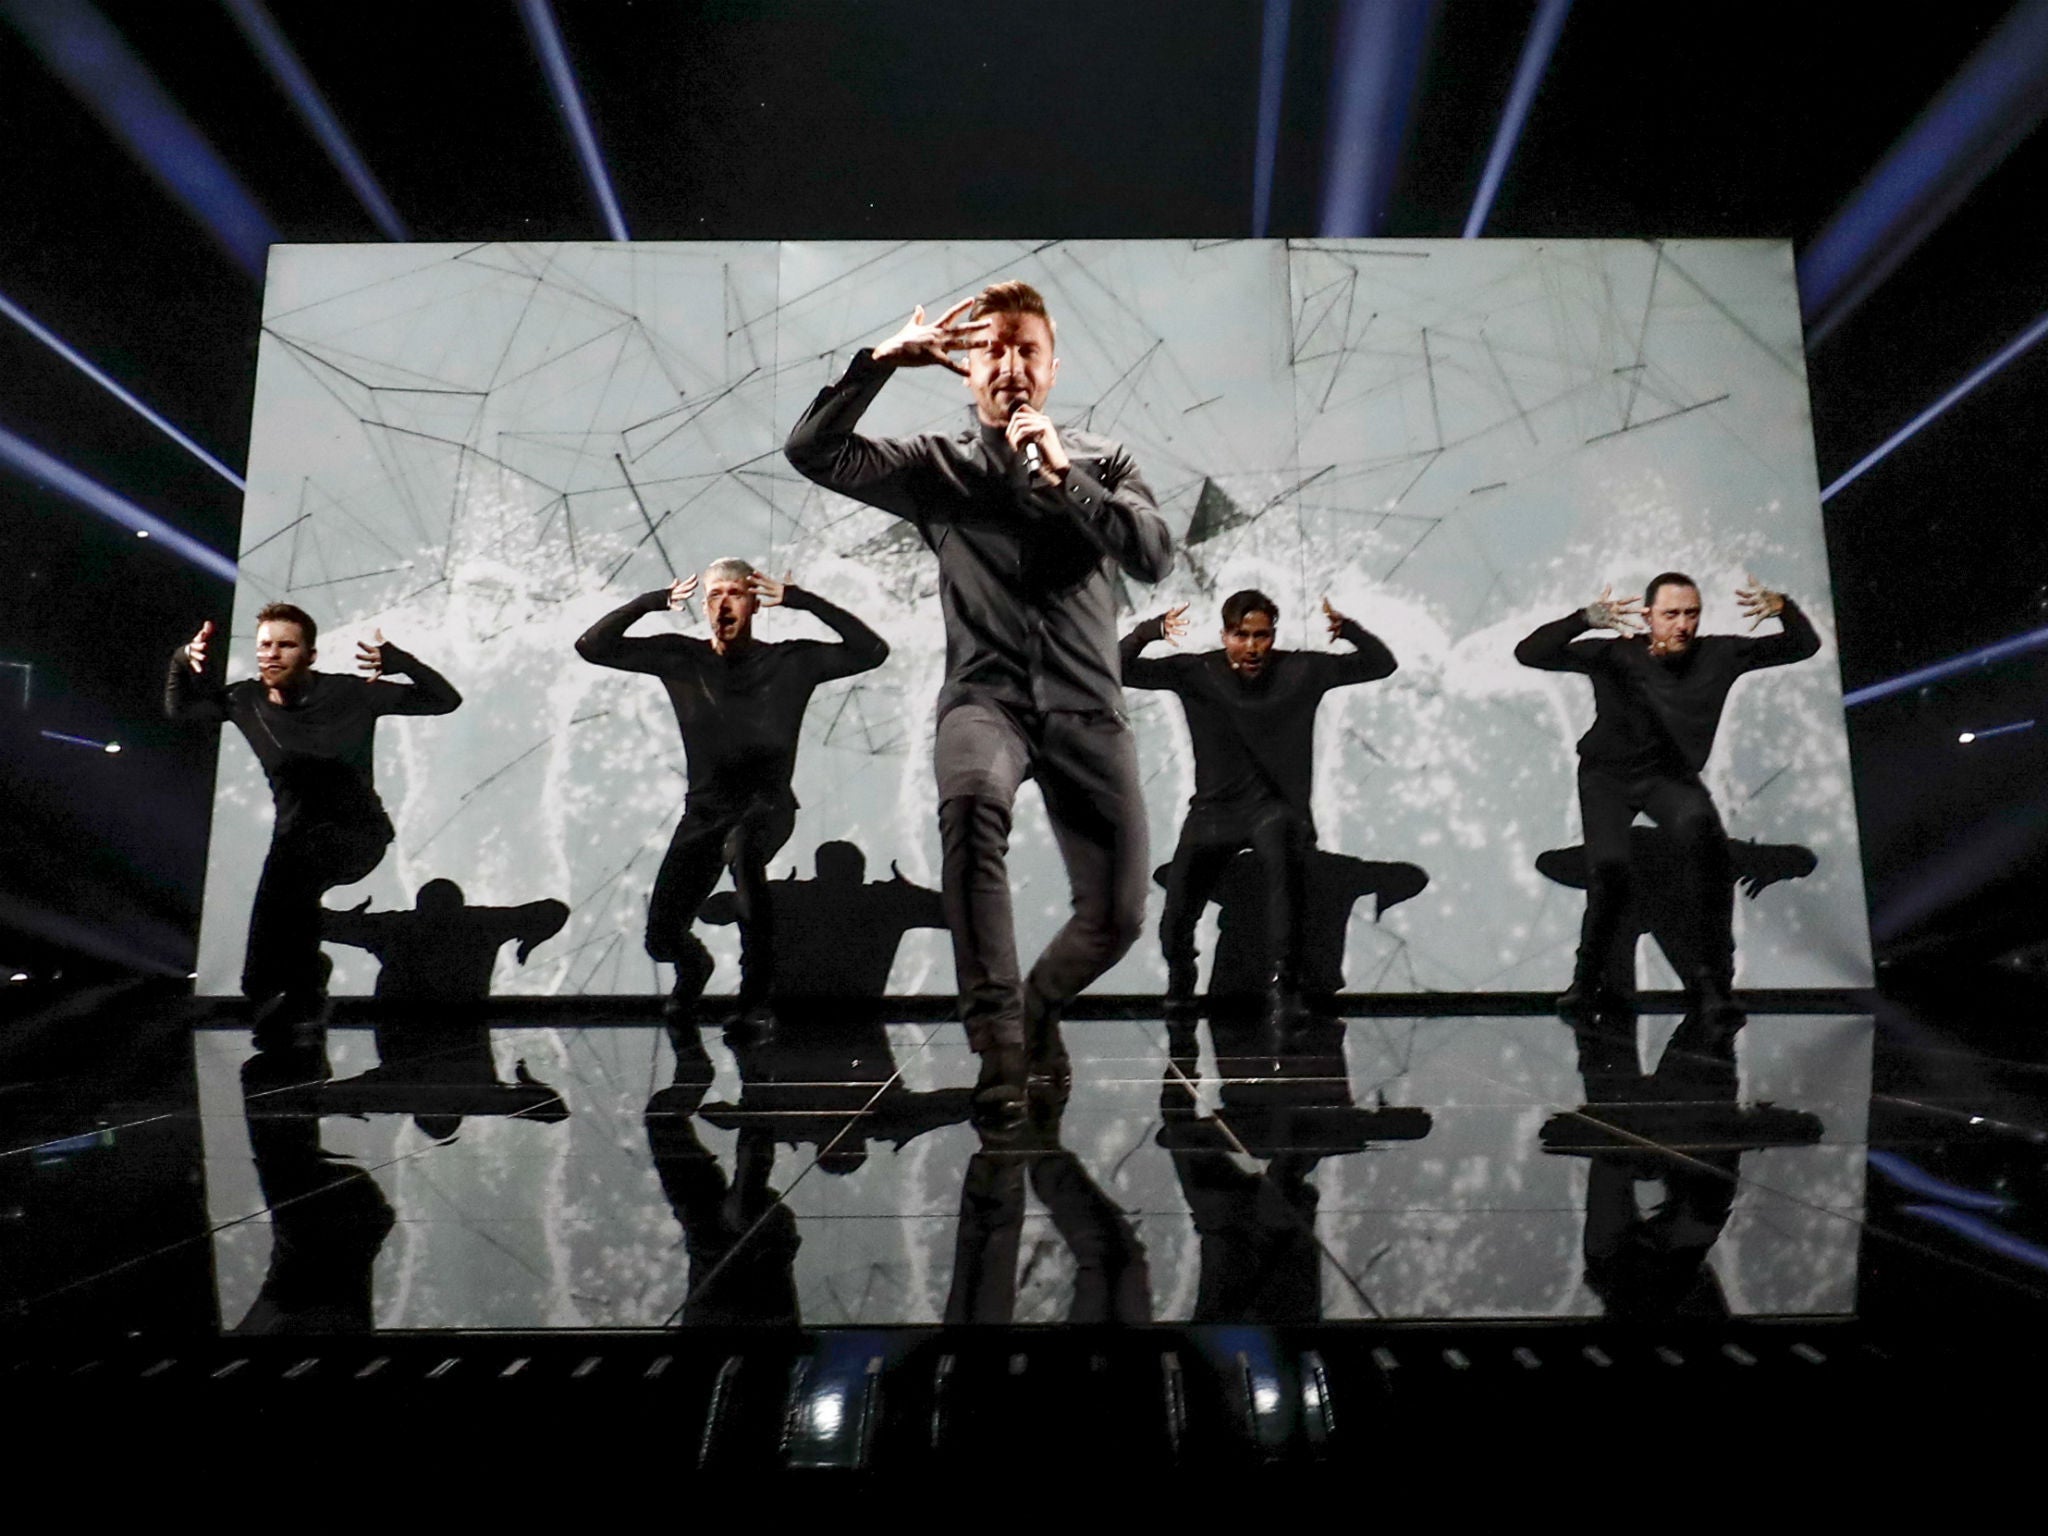 Sergey Lazarev is the first Eurovision semi-final favourite with 'You Are the Only One' for Russia